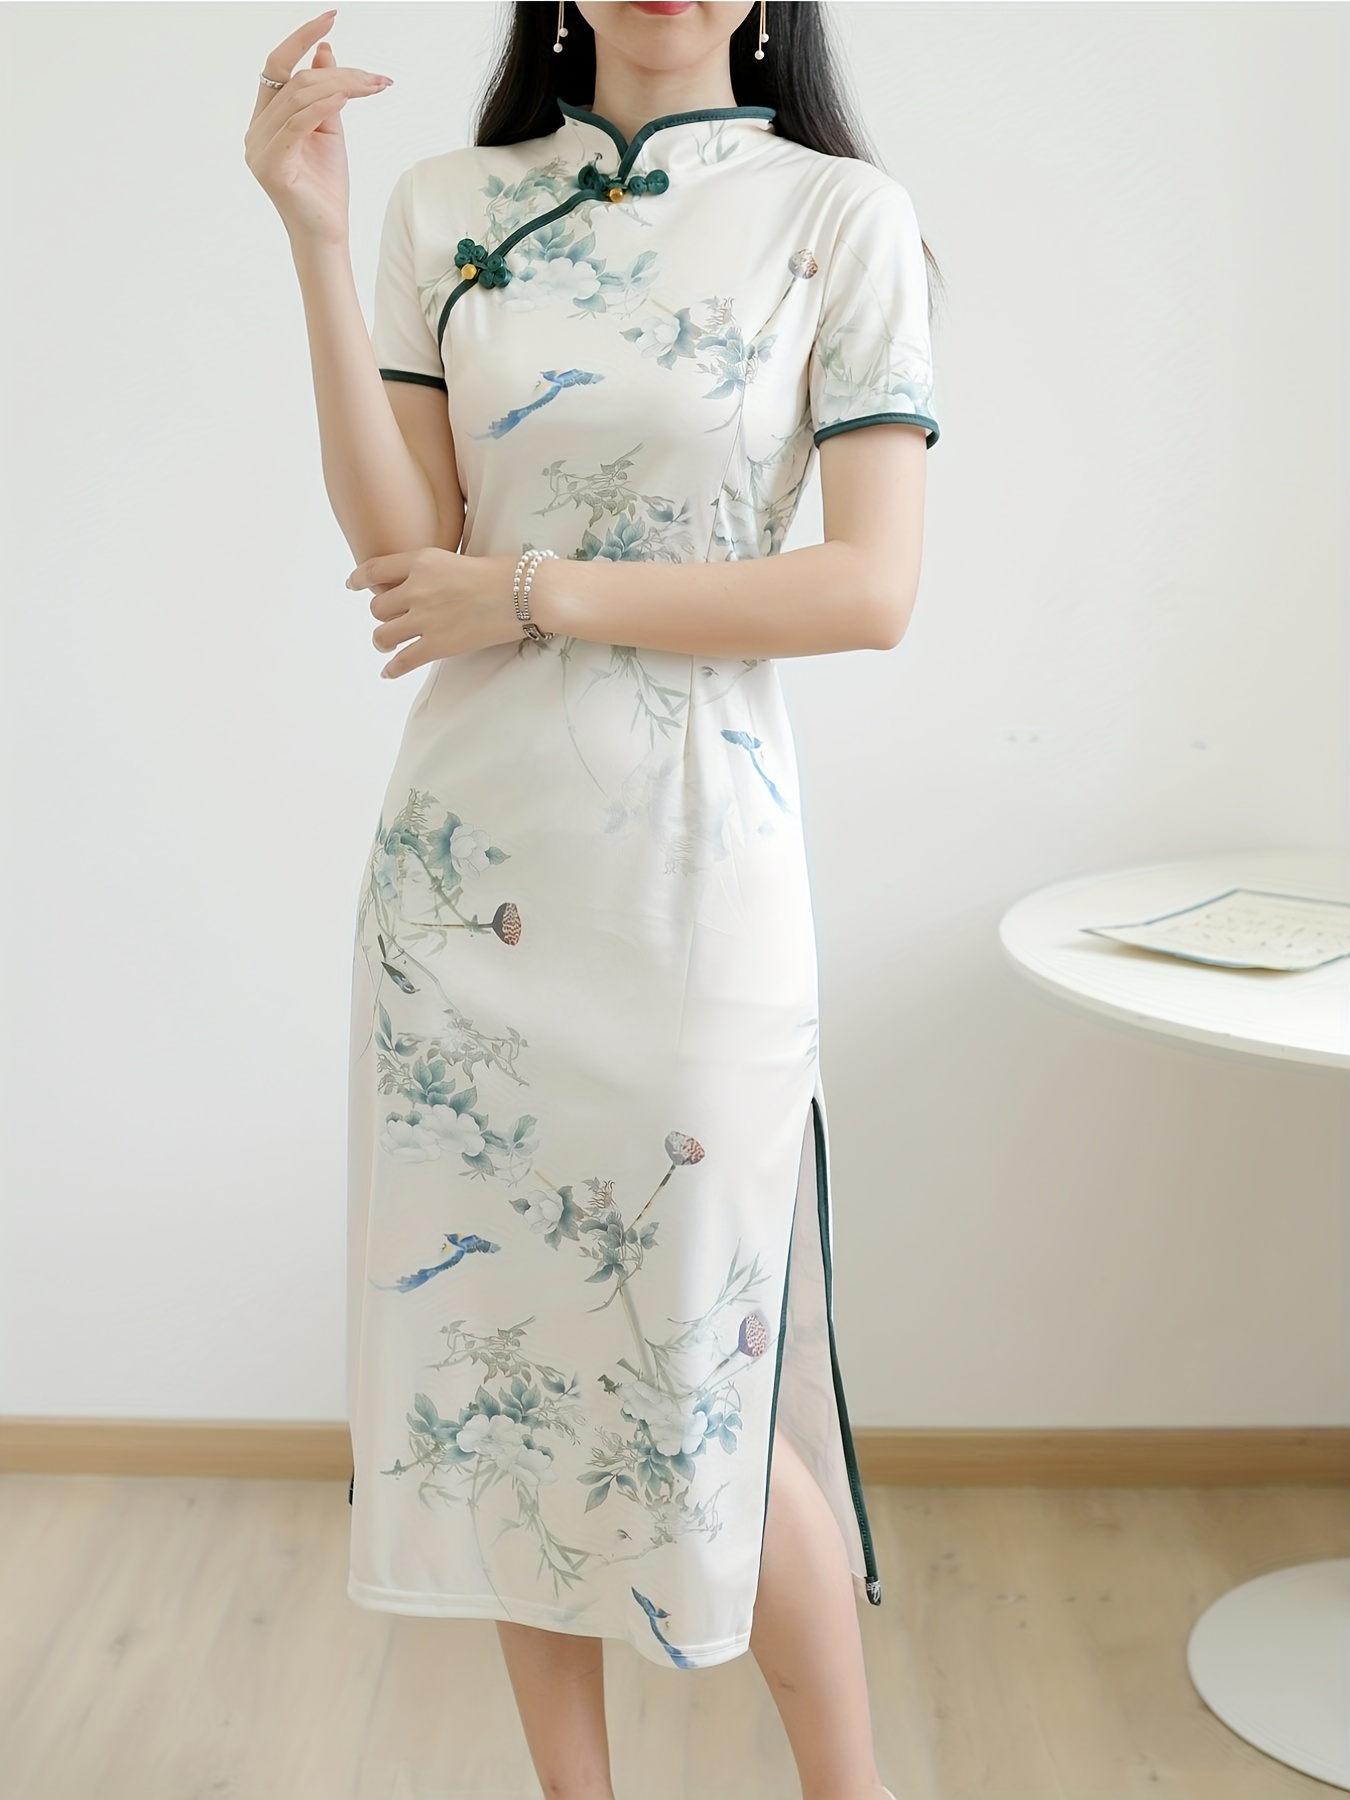 100 Traditional Chinese Dresses ideas